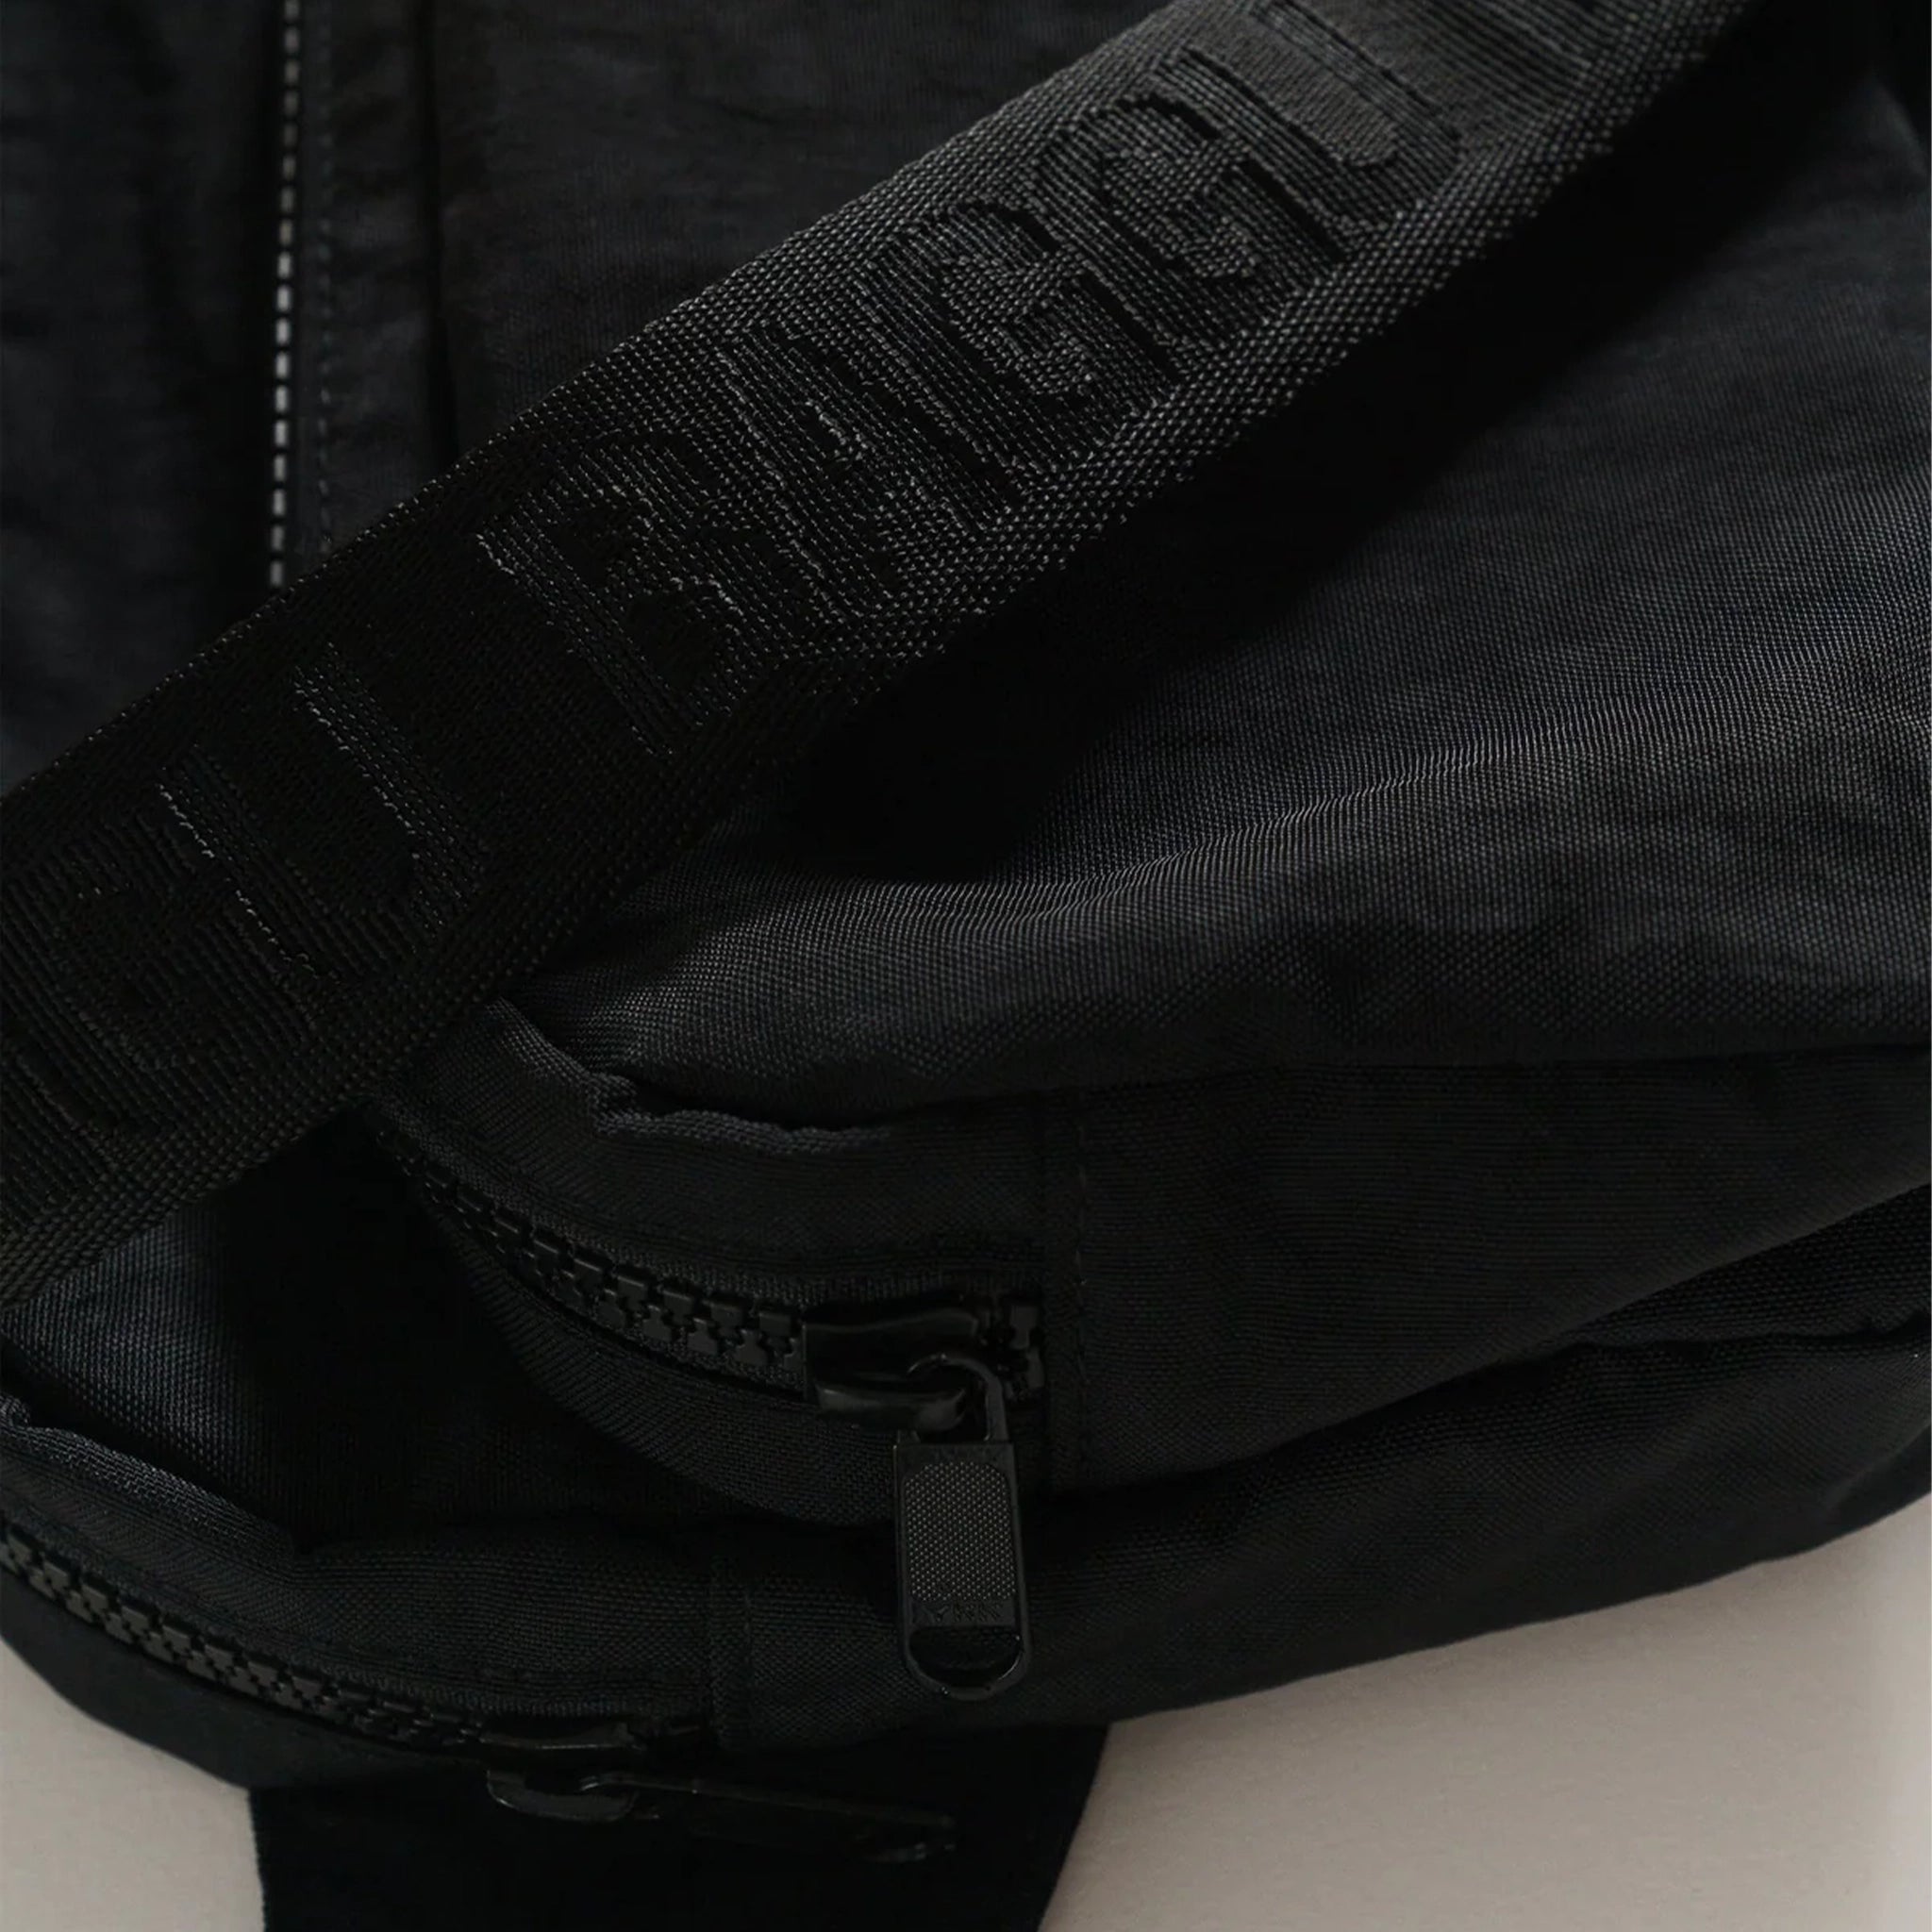 A black nylon fanny pack with two zipper pockets and a black adjustable strap.